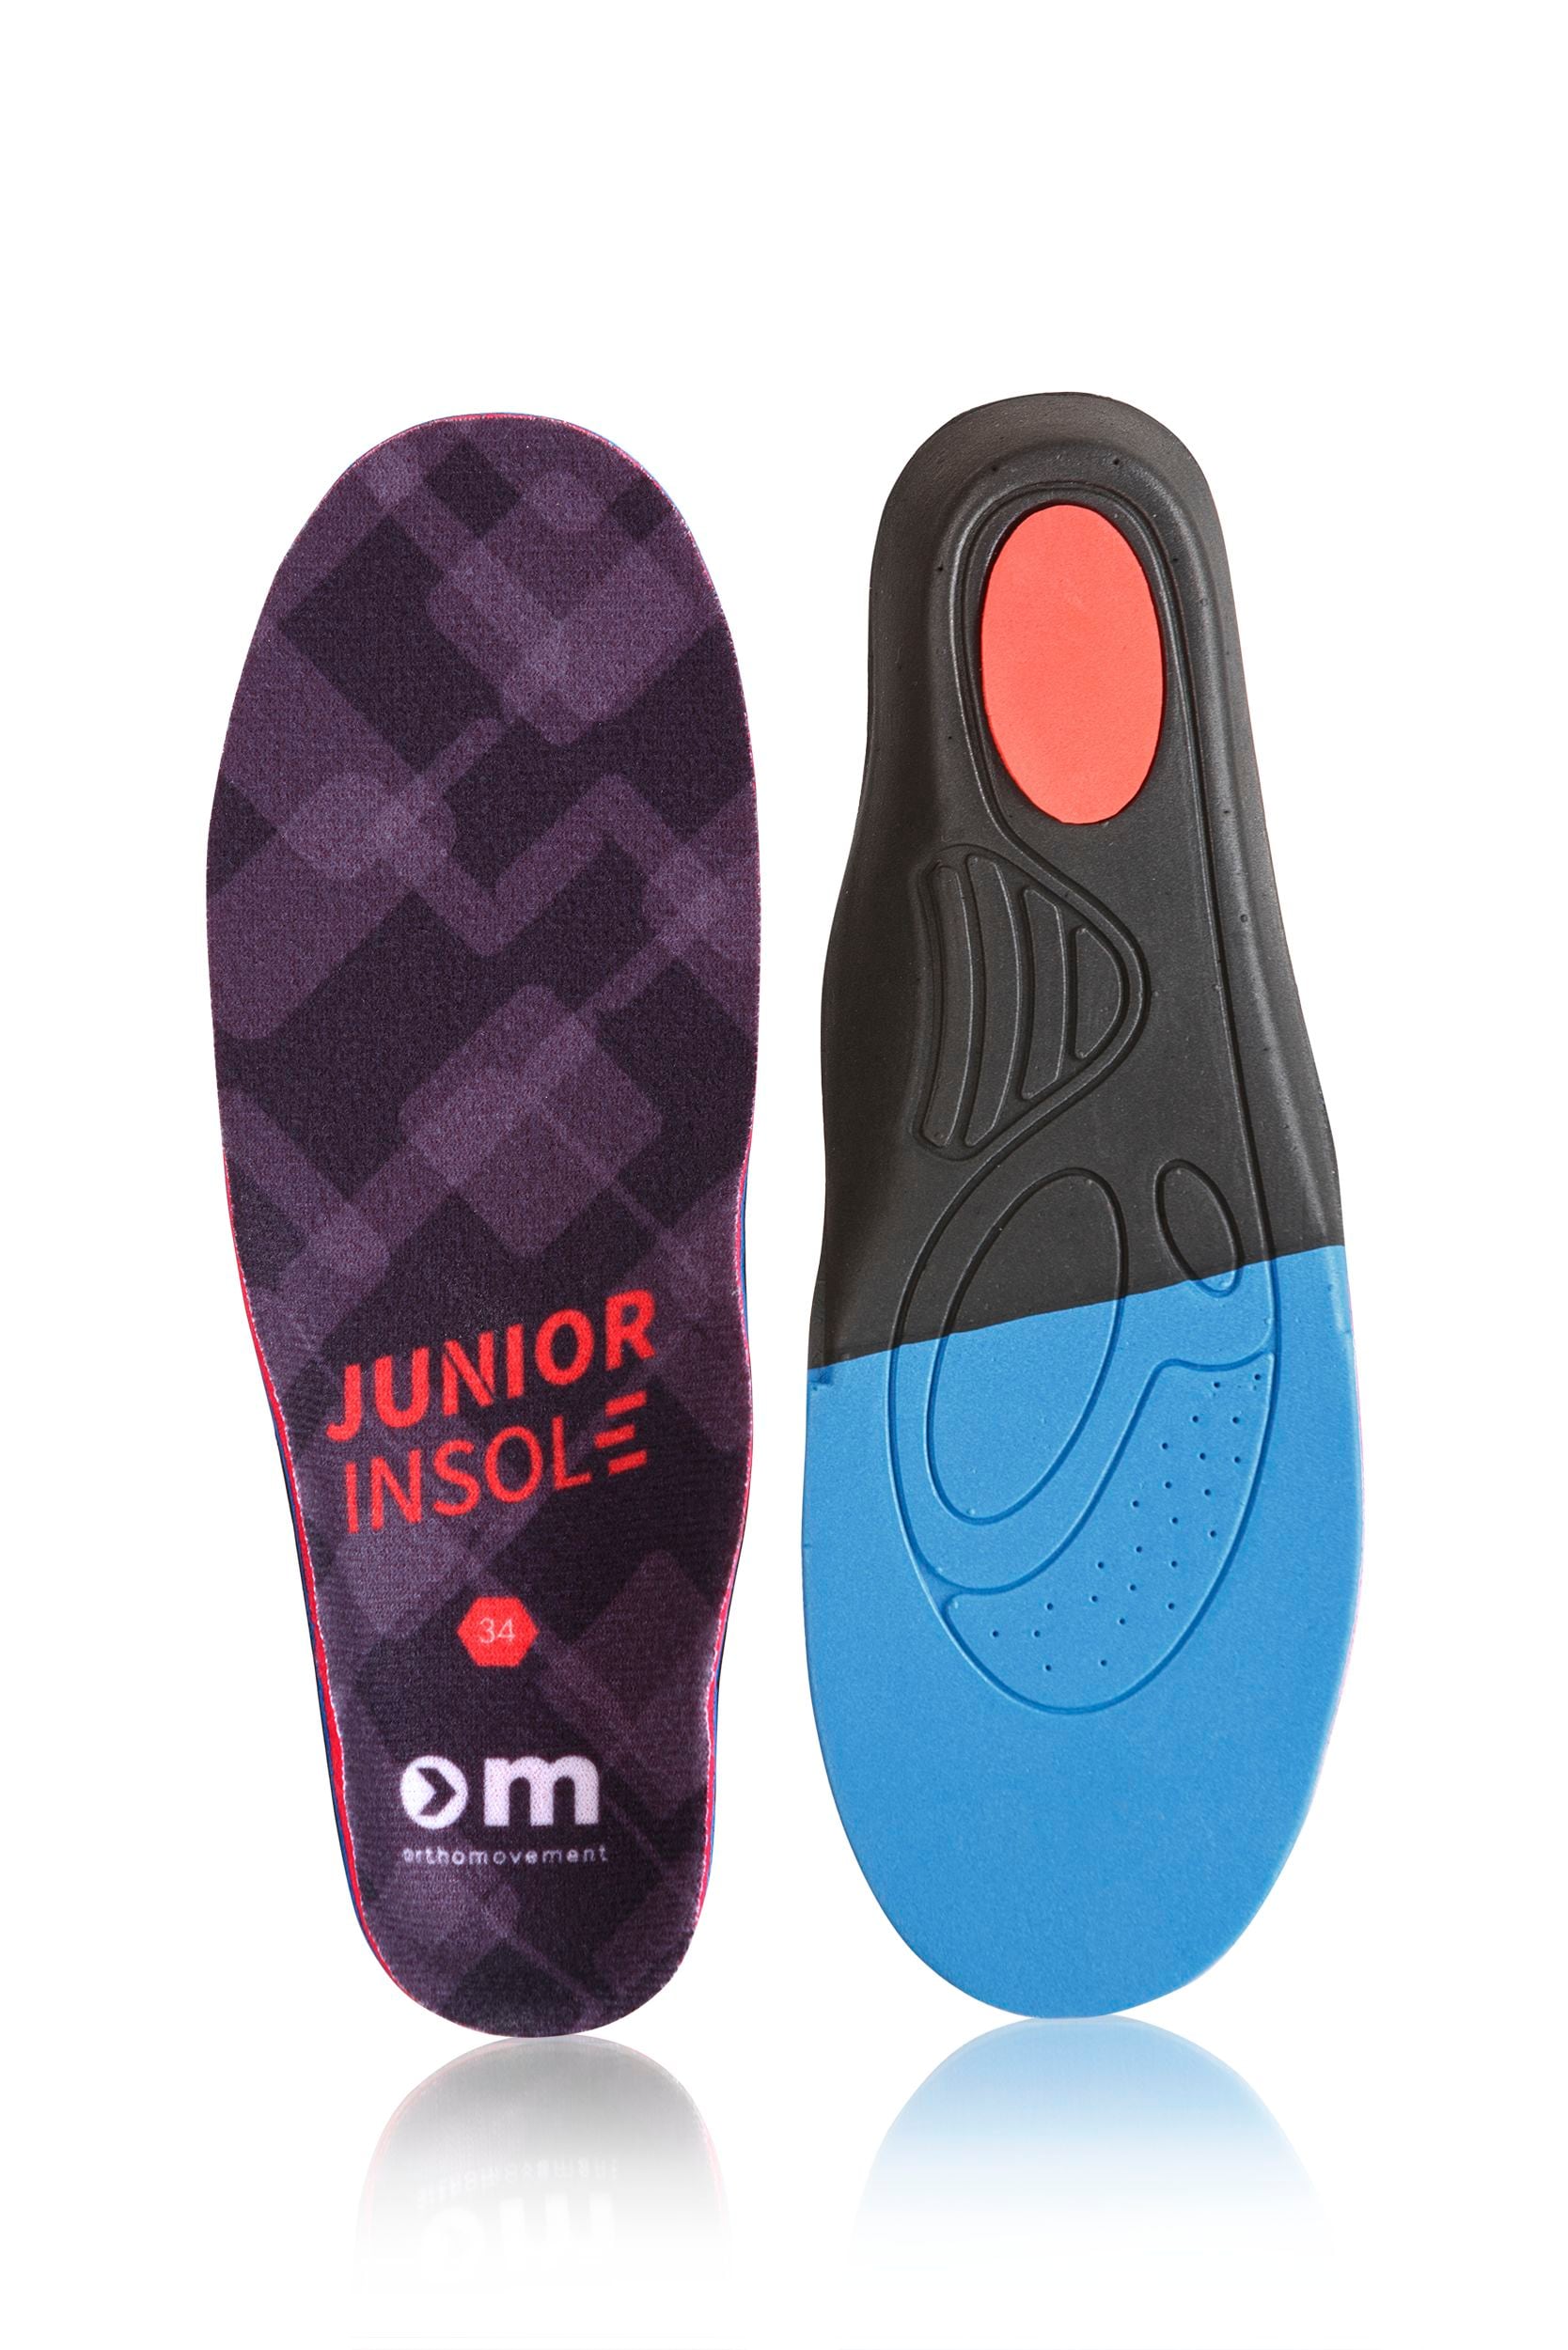 ORTHO MOVEMENT, JUNIOR INSOLE